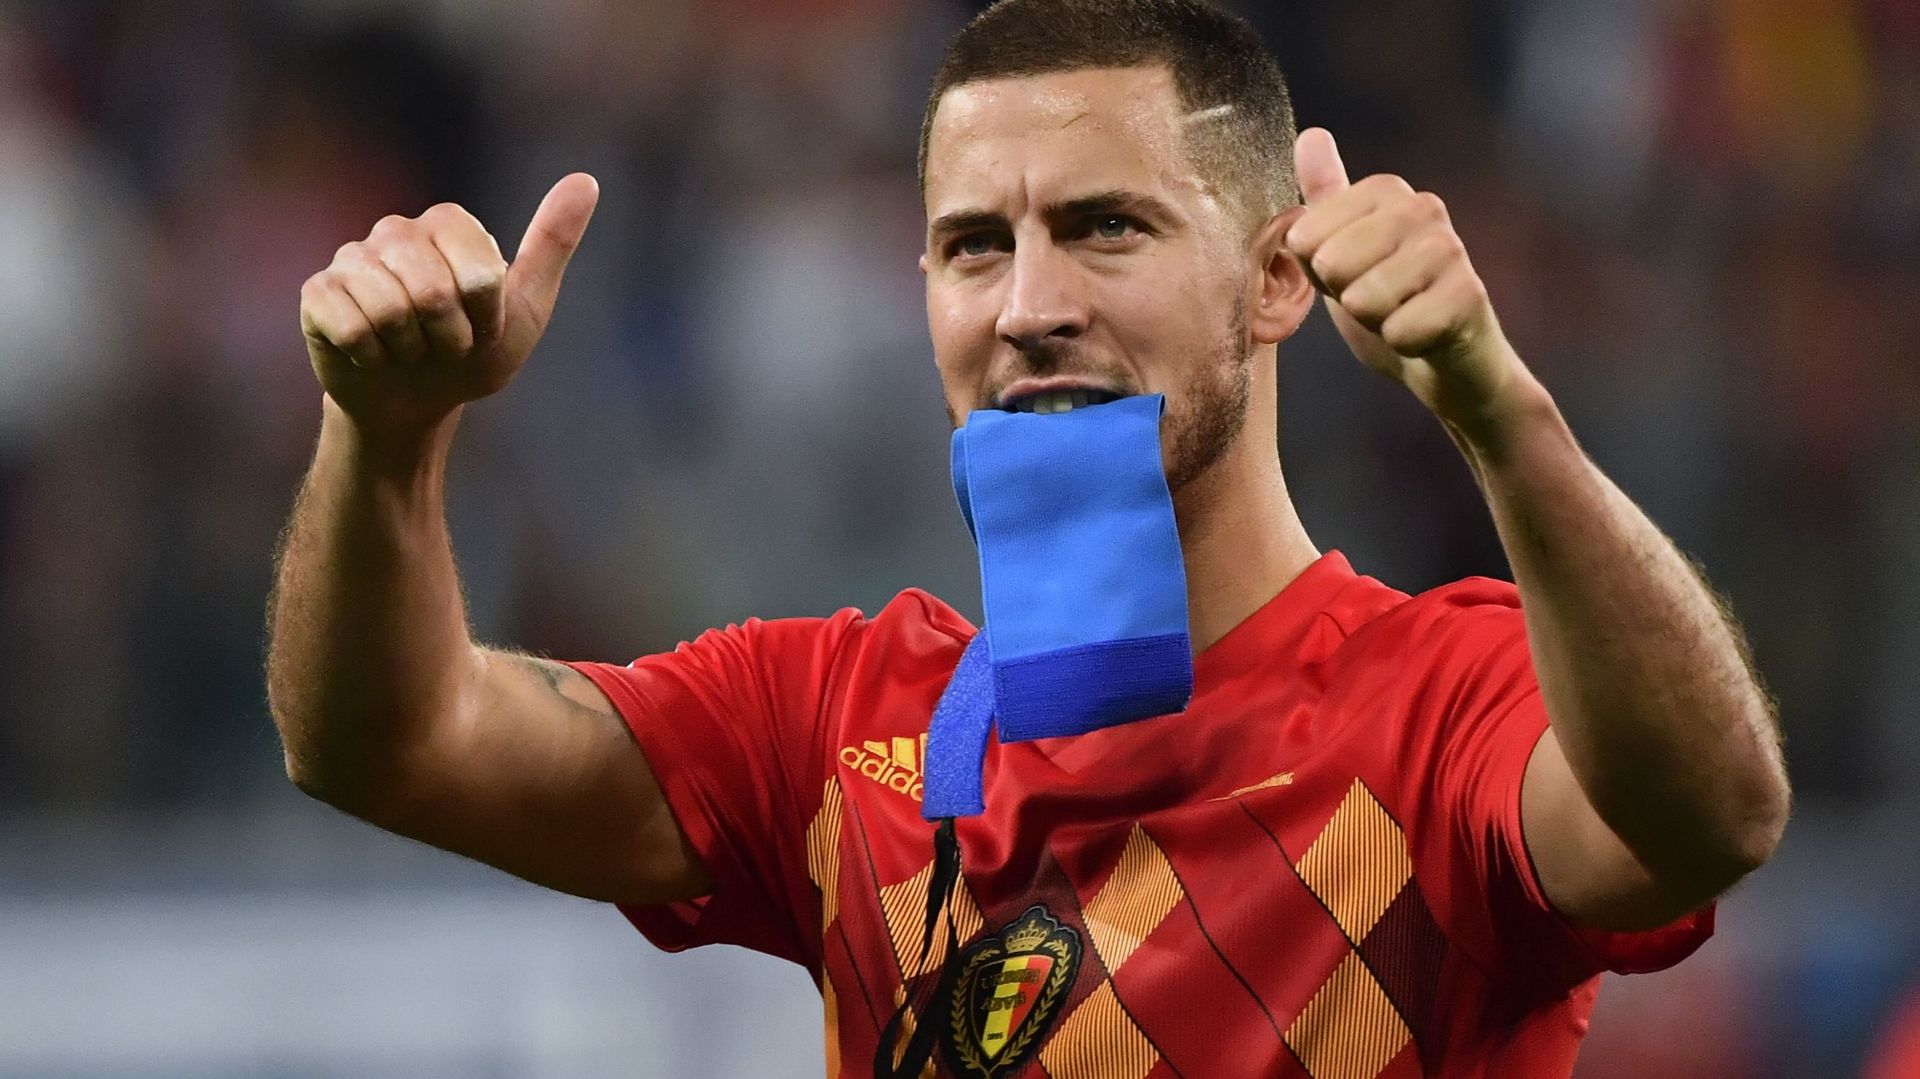 Eden Hazard thanks supporters after they lost the semi final match between the French national soccer team